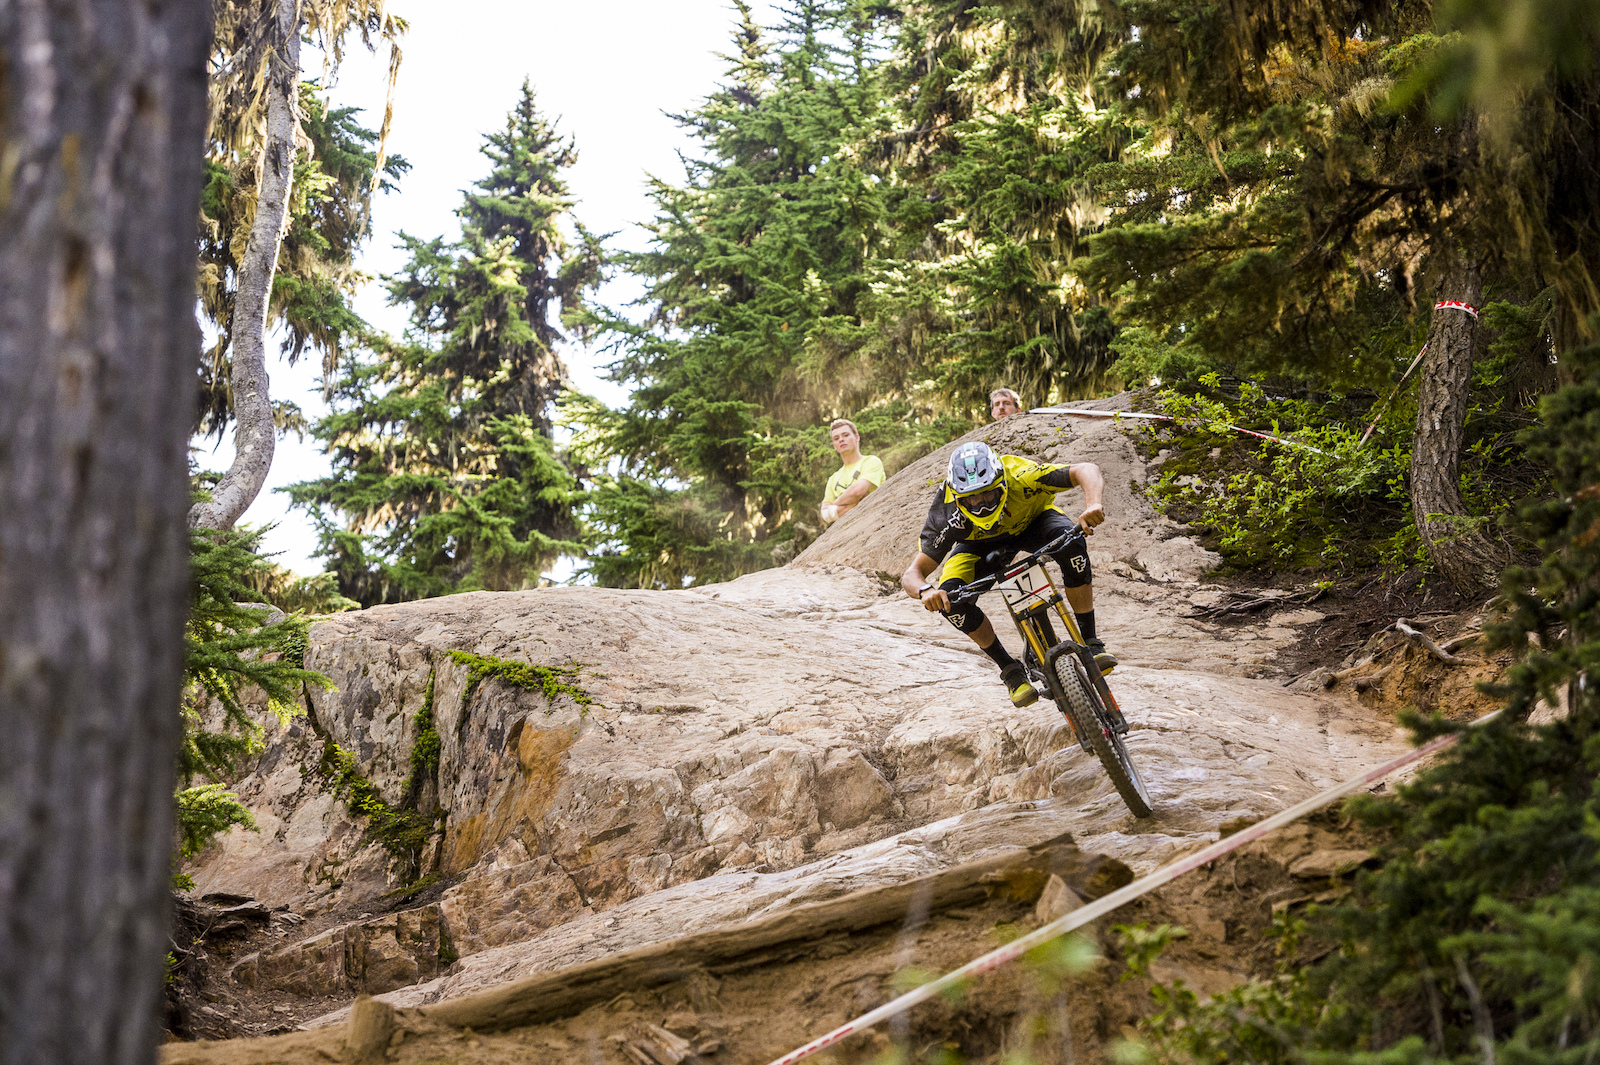 racing the garbo dh at the 2016 Crankworx festival.